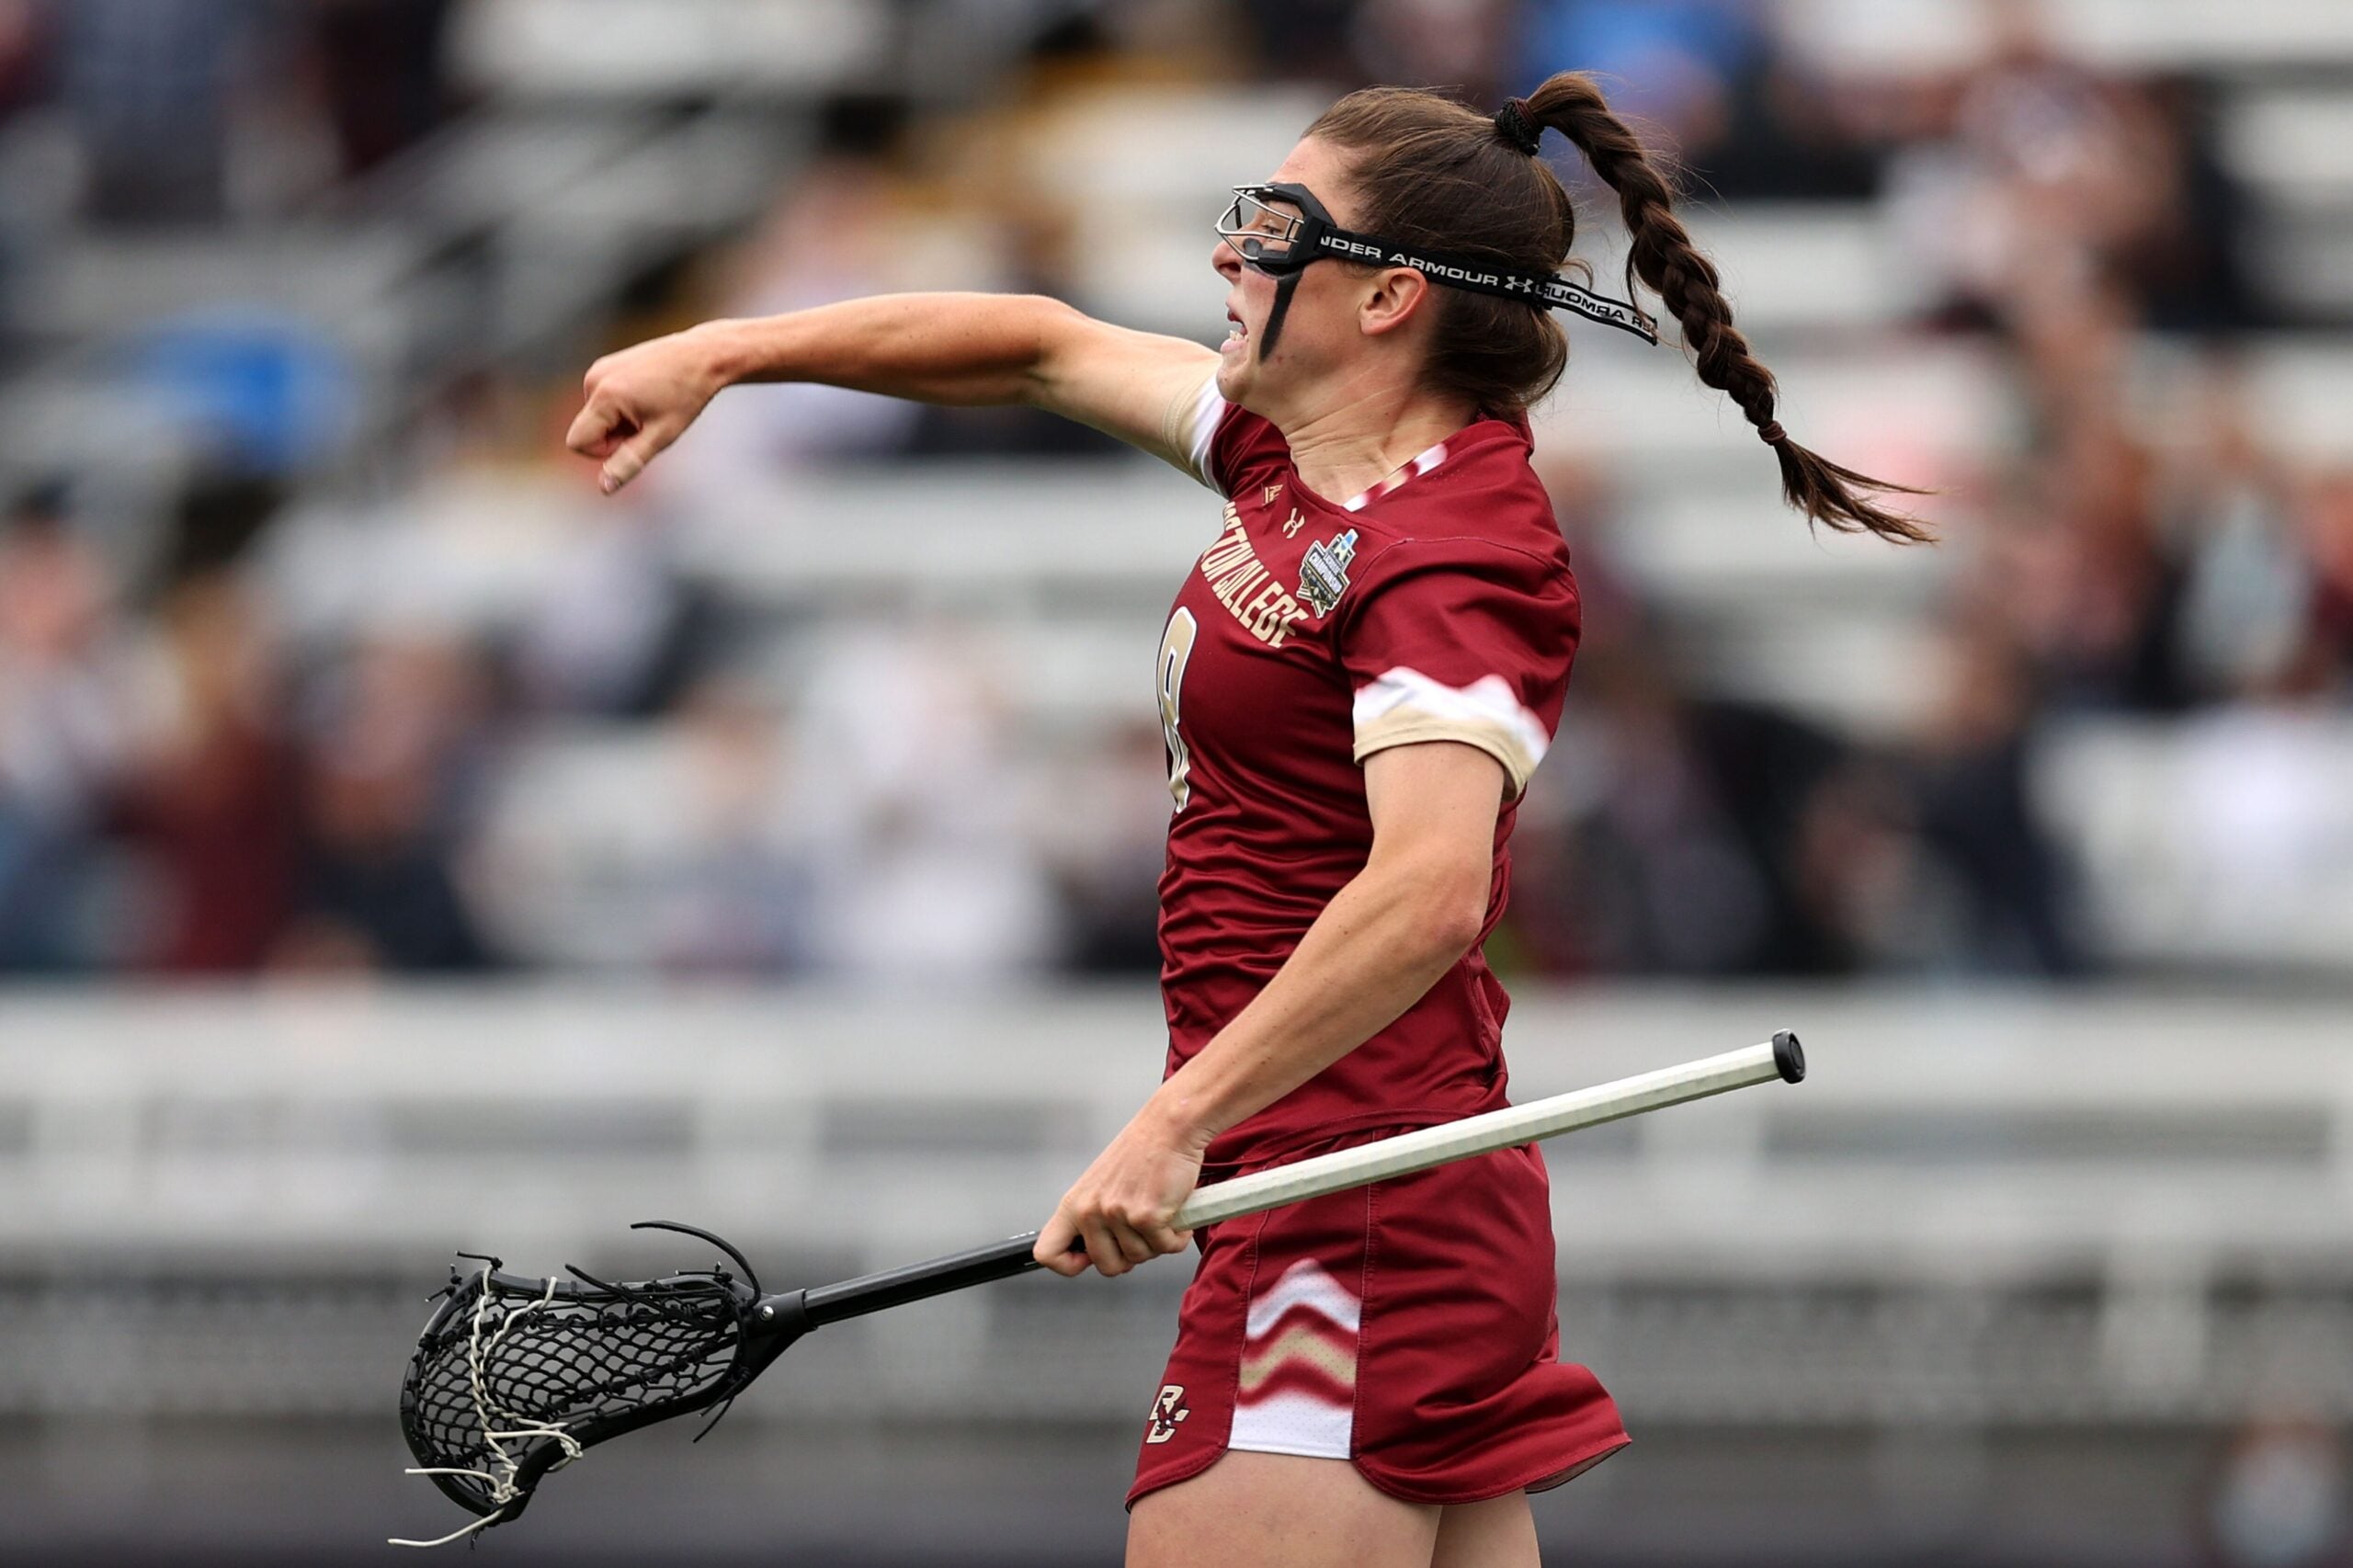 boston-college-women-s-lacrosse-team-defeats-syracuse-to-win-first